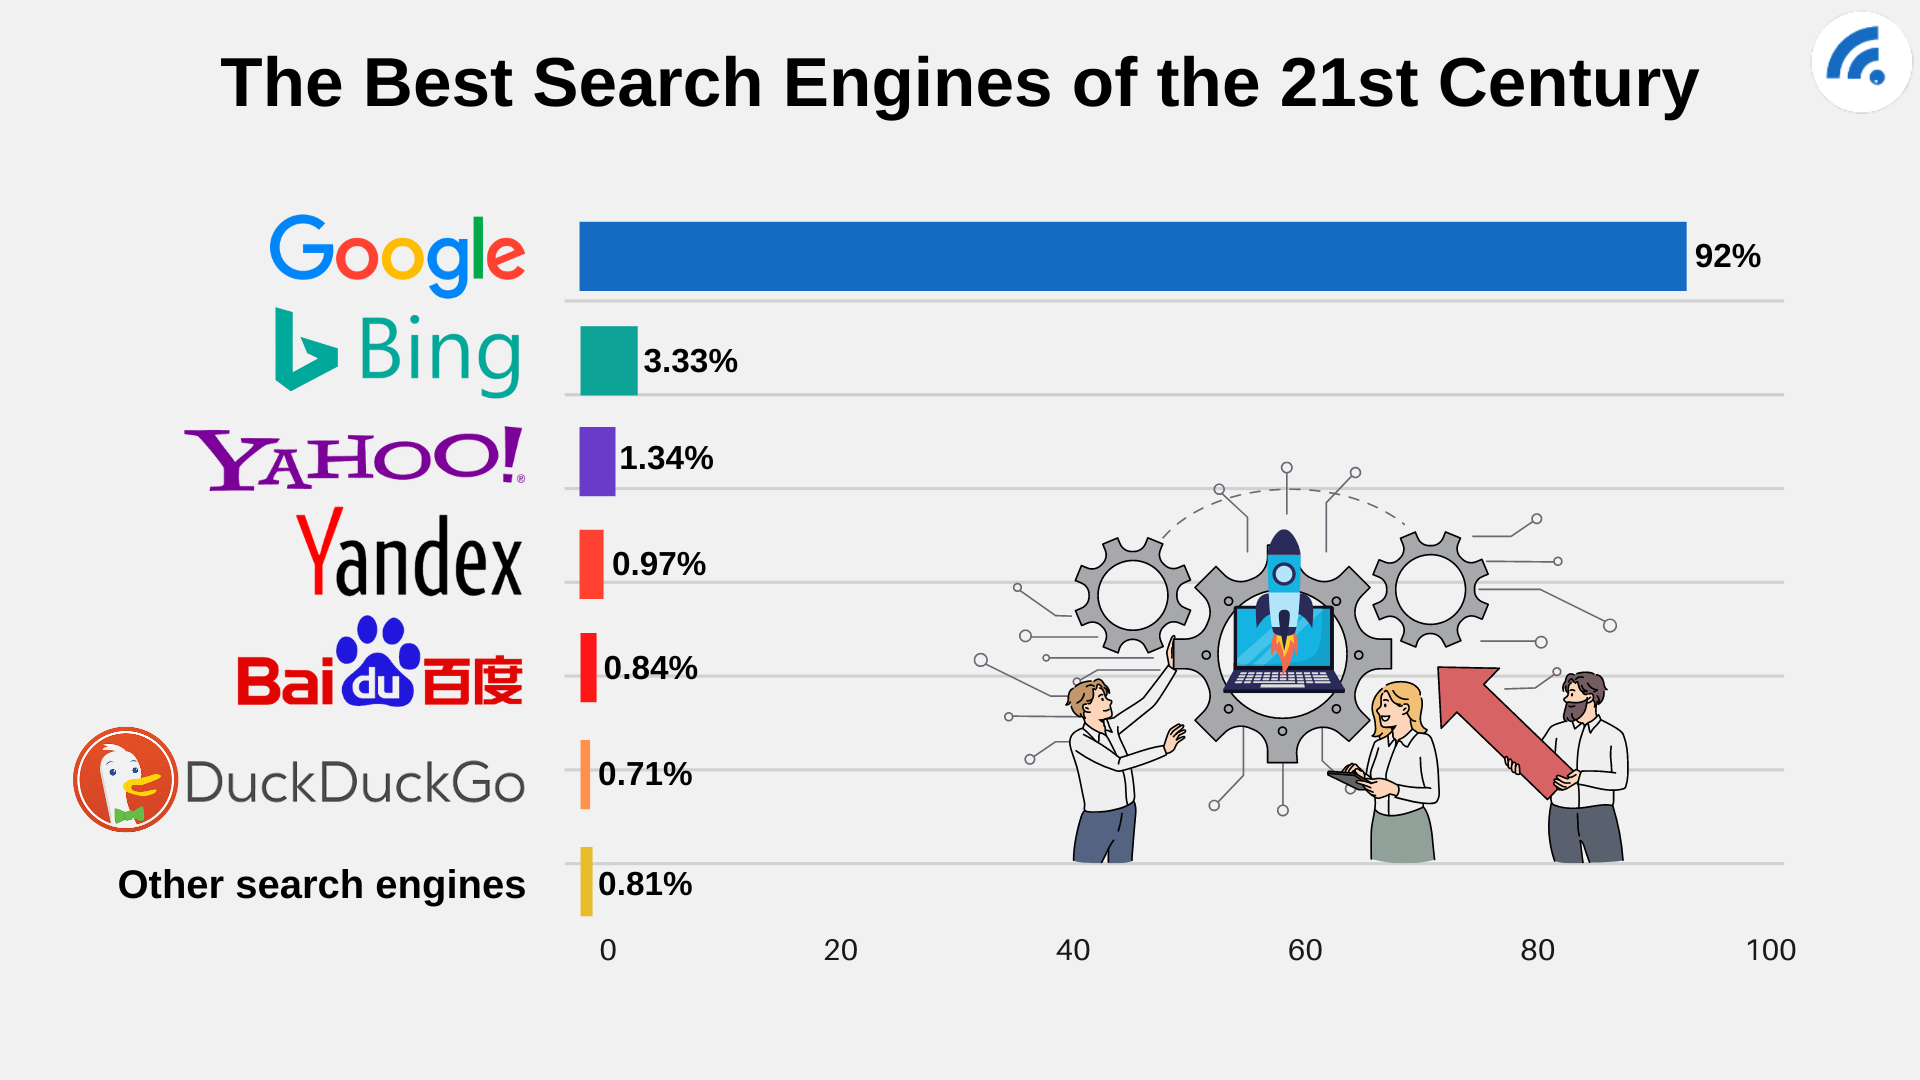 Which search engine you most liked to use?